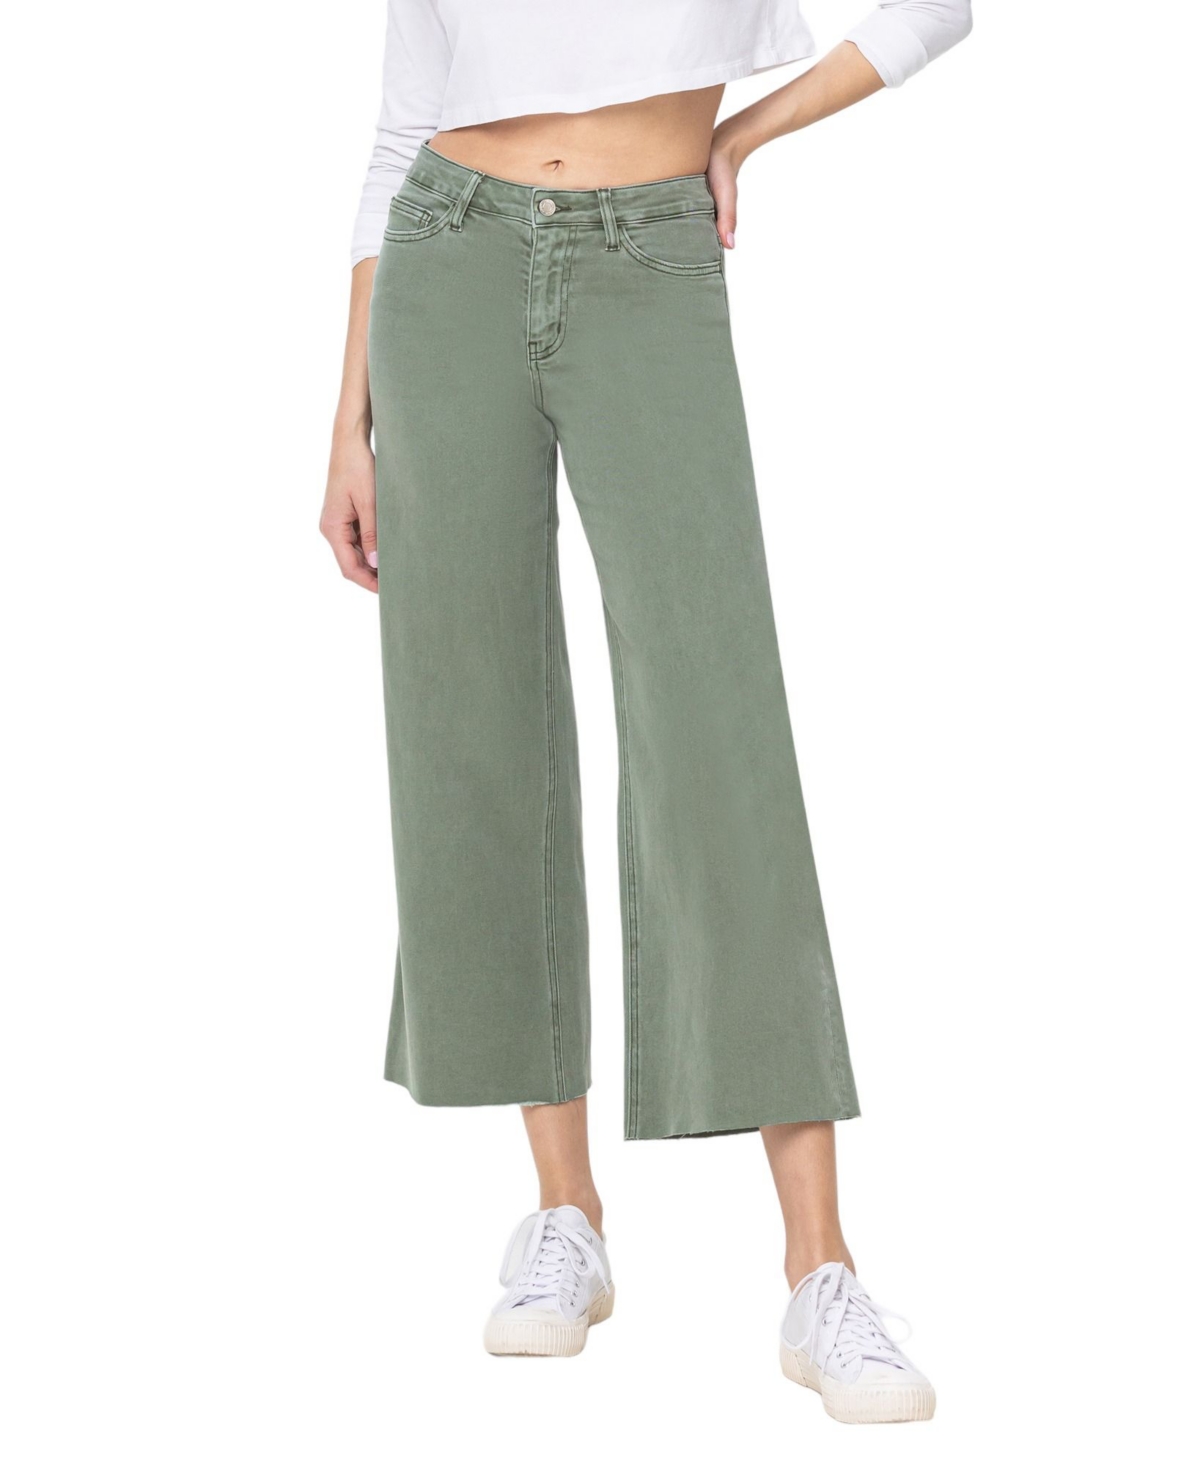 Women's High Rise Cropped Wide Leg Jeans - Army green